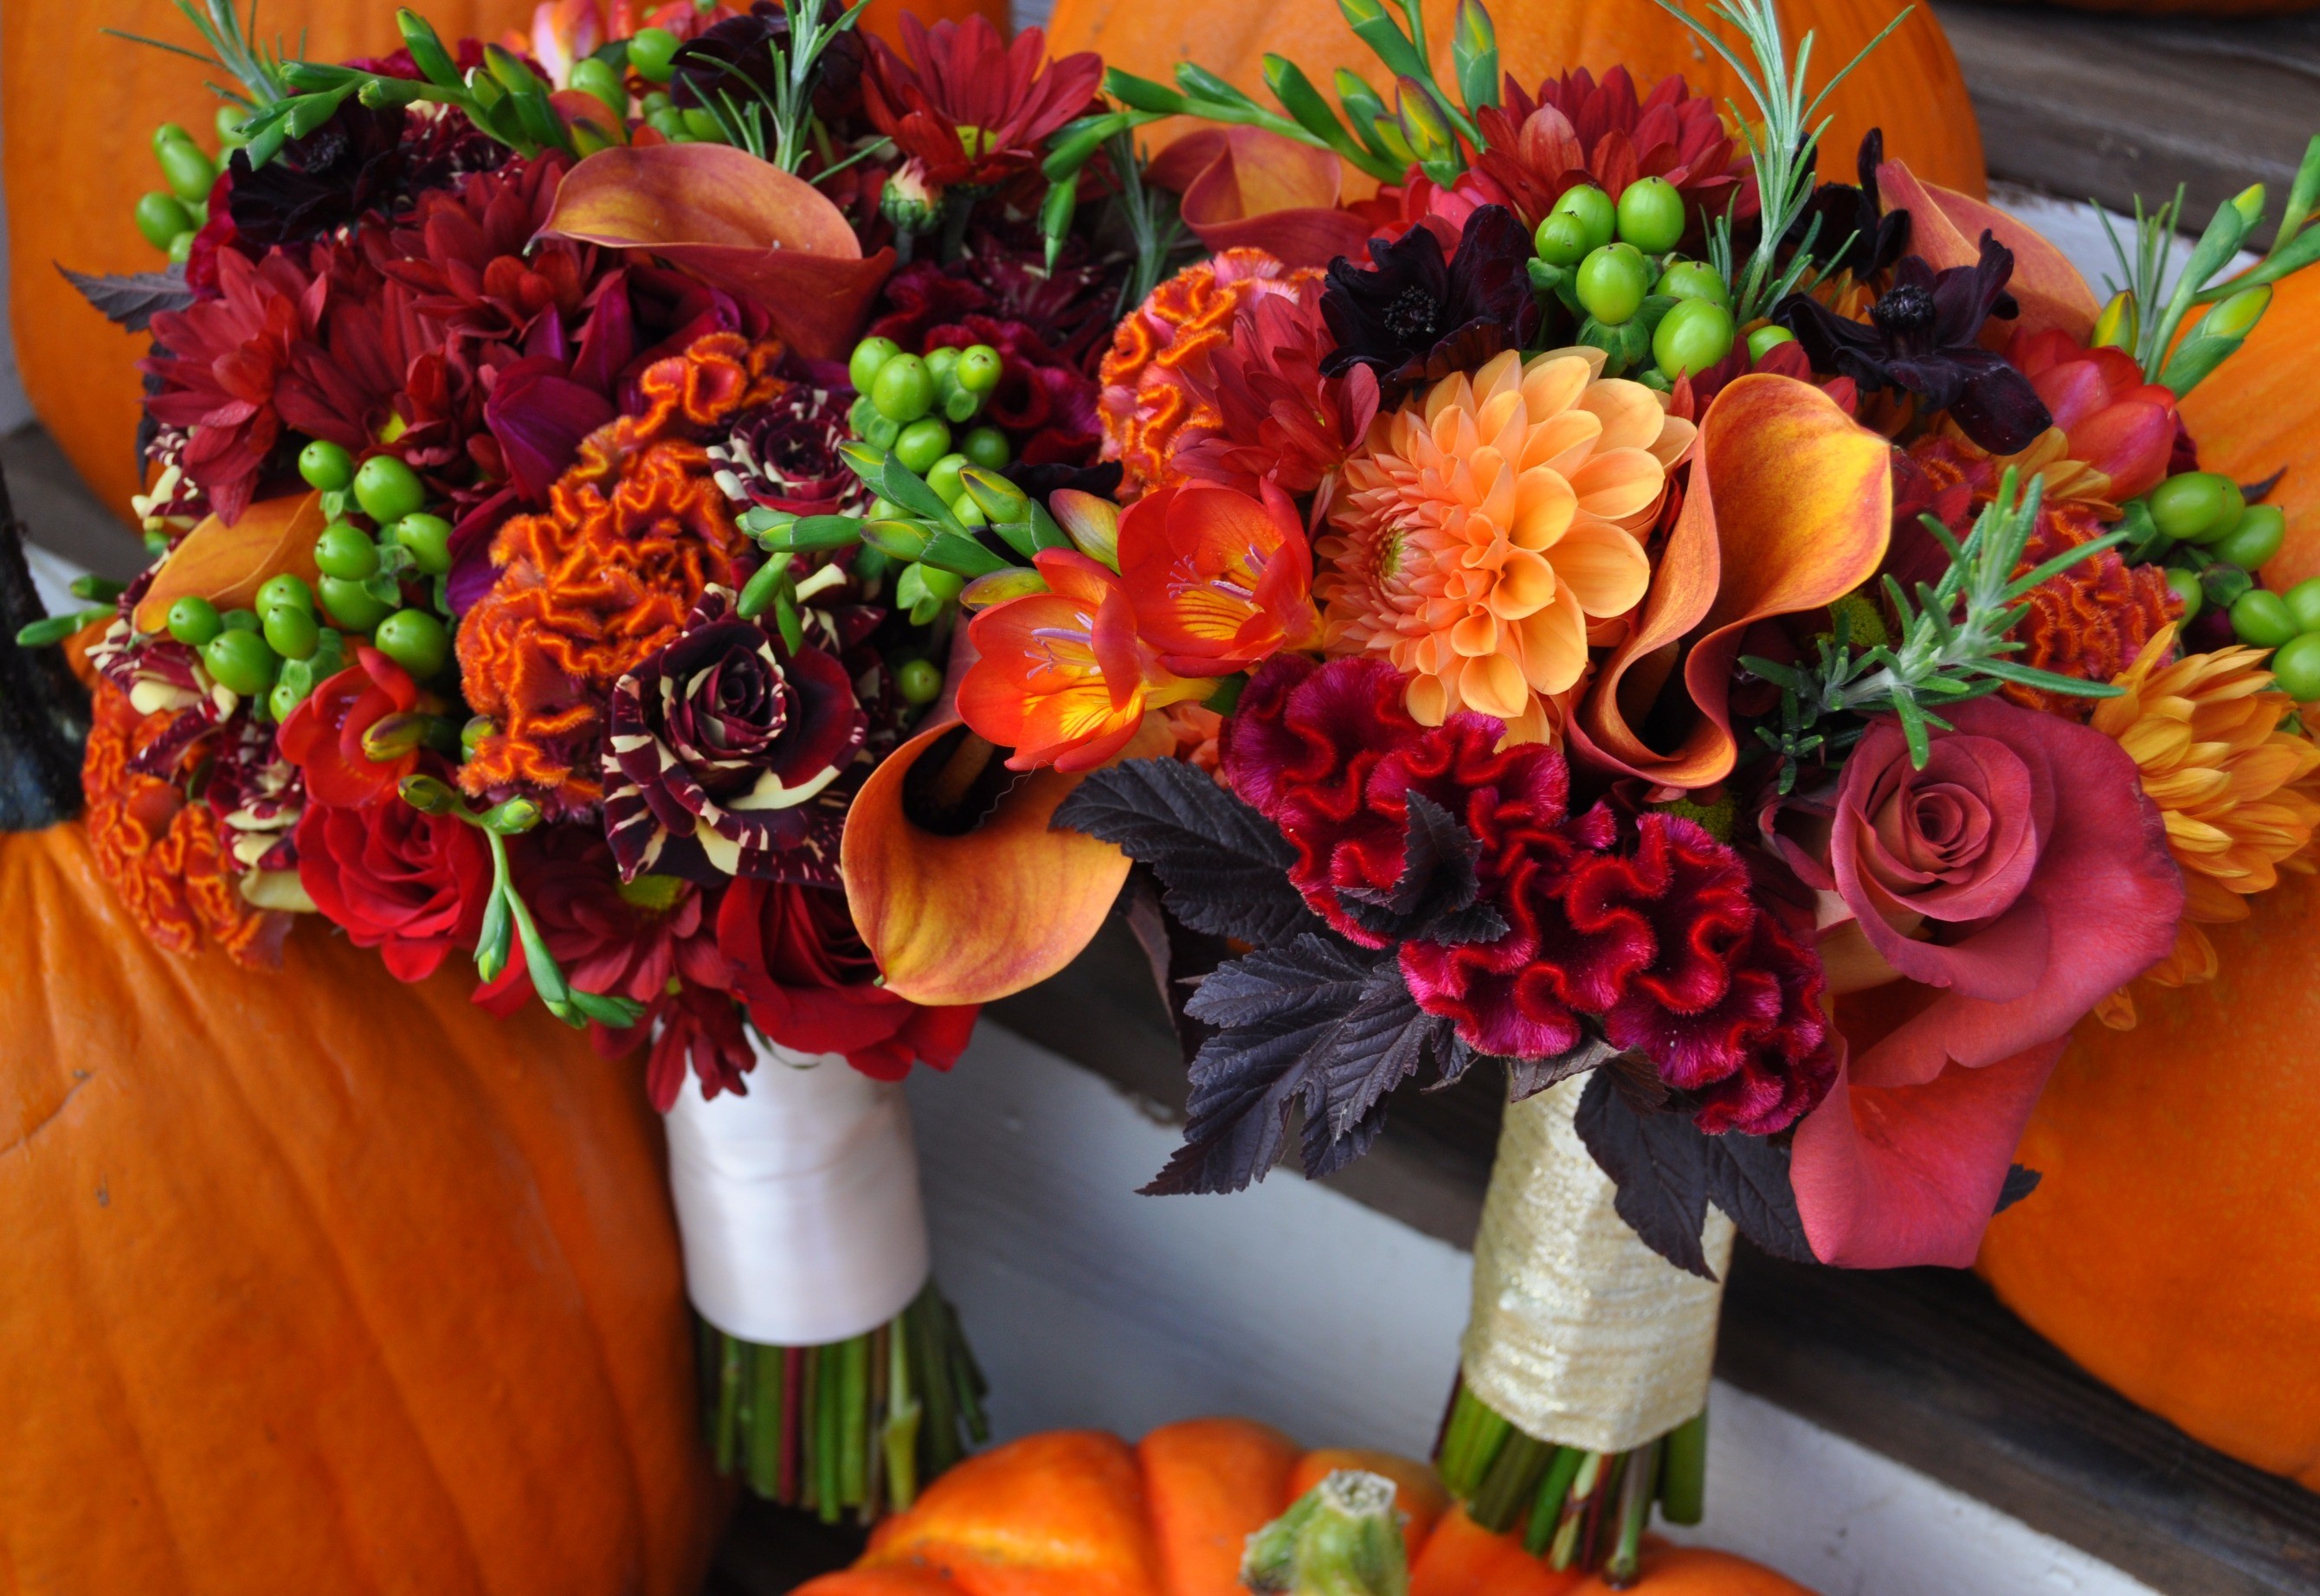 2680x1844 Fall wedding colors country bouquets desktop wallpapers.